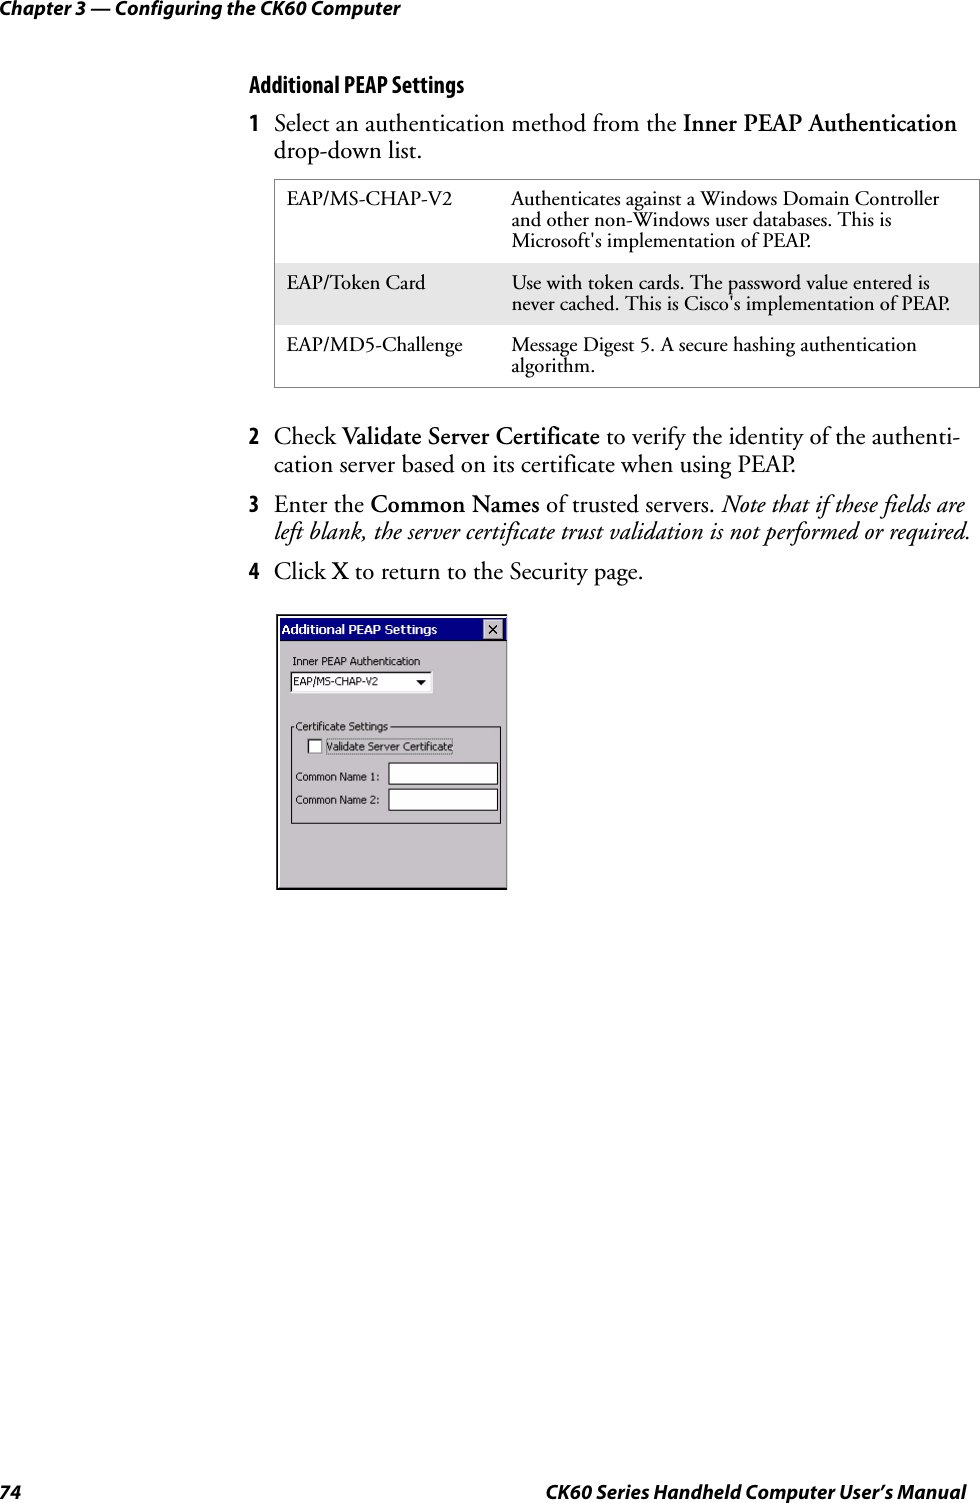 Chapter 3 — Configuring the CK60 Computer74 CK60 Series Handheld Computer User’s ManualAdditional PEAP Settings1Select an authentication method from the Inner PEAP Authentication drop-down list.2Check Validate Server Certificate to verify the identity of the authenti-cation server based on its certificate when using PEAP.3Enter the Common Names of trusted servers. Note that if these fields are left blank, the server certificate trust validation is not performed or required.4Click X to return to the Security page.EAP/MS-CHAP-V2 Authenticates against a Windows Domain Controller and other non-Windows user databases. This is Microsoft&apos;s implementation of PEAP.EAP/Token Card Use with token cards. The password value entered is never cached. This is Cisco&apos;s implementation of PEAP.EAP/MD5-Challenge Message Digest 5. A secure hashing authentication algorithm.